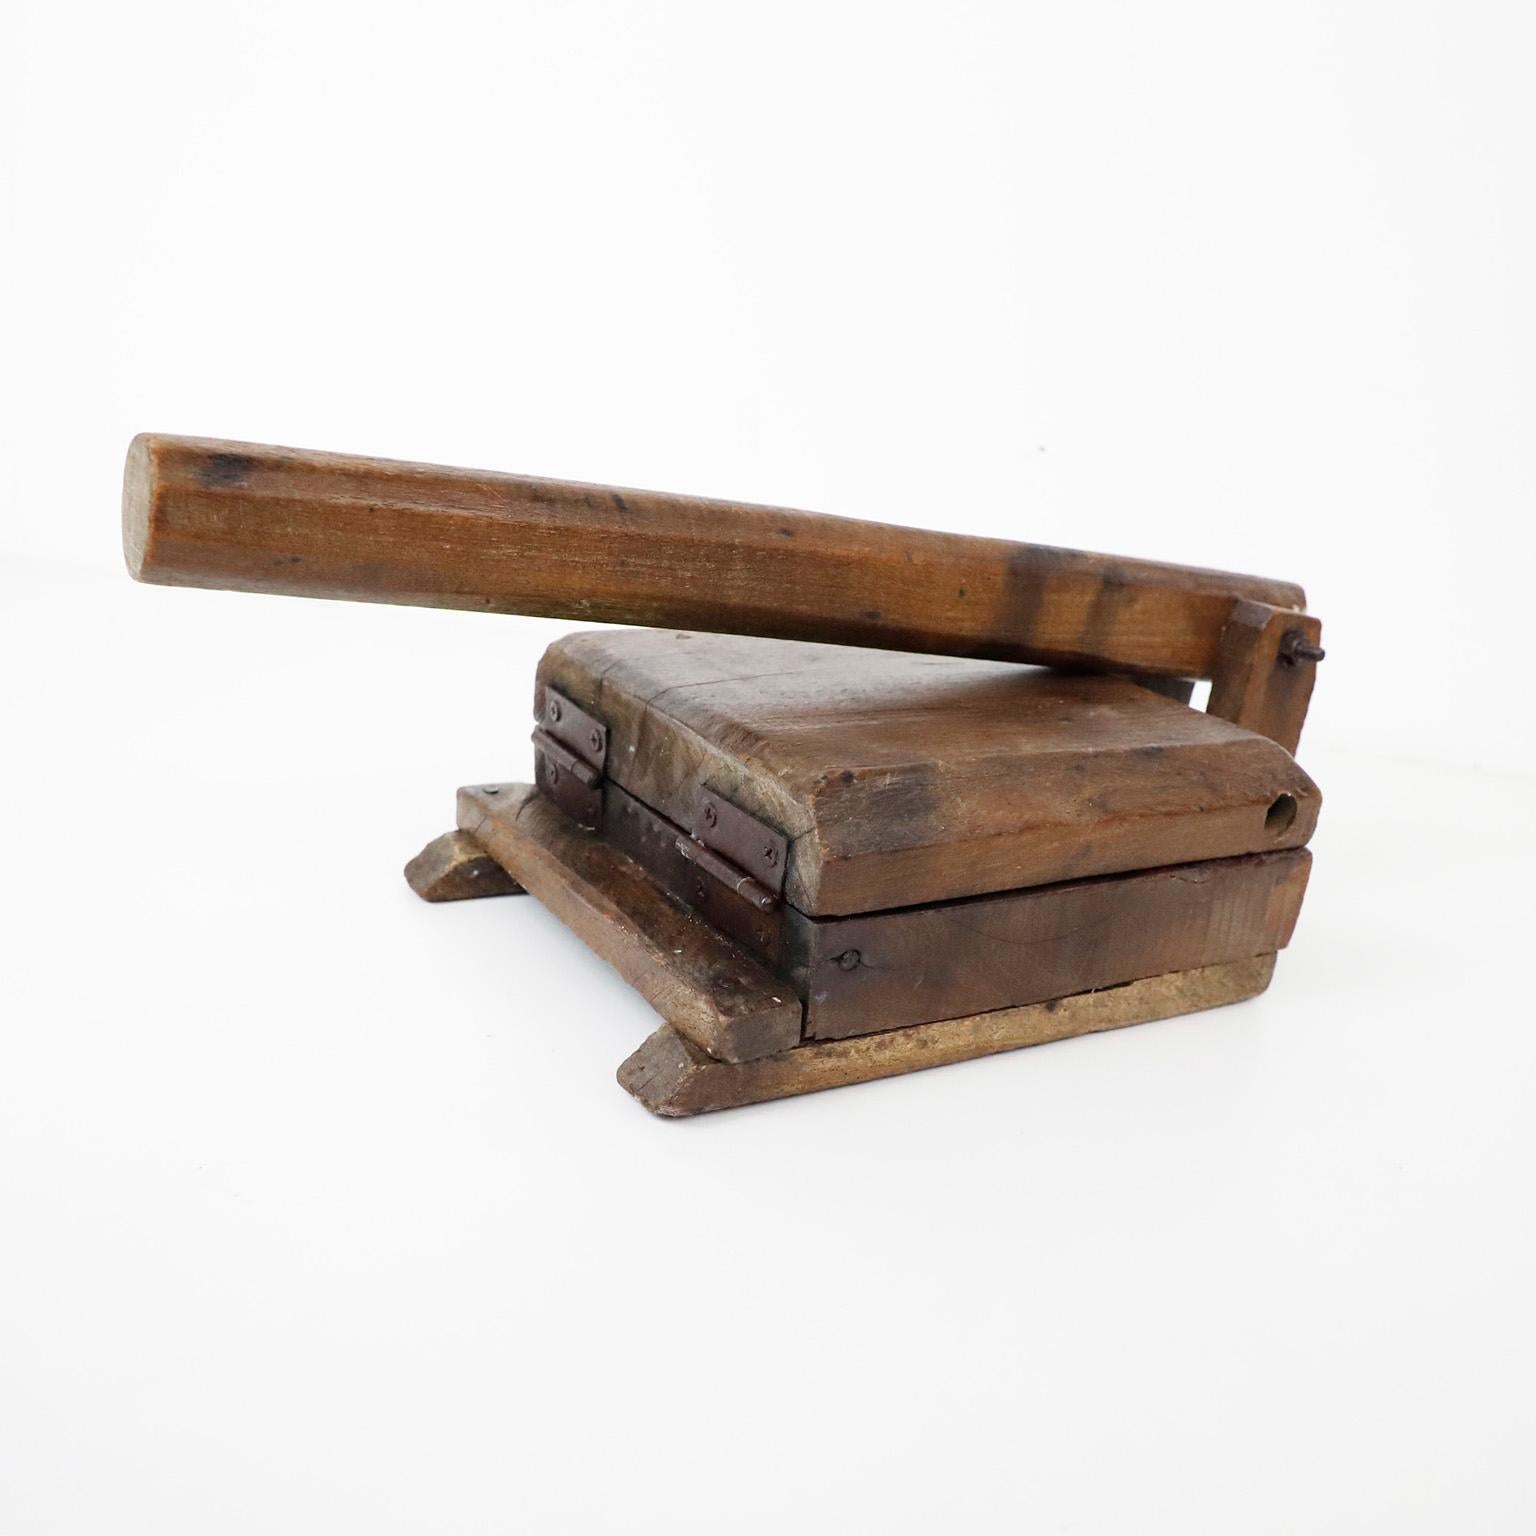 We offer this antique tortilla press maker in mesquite wood, circa 1950.